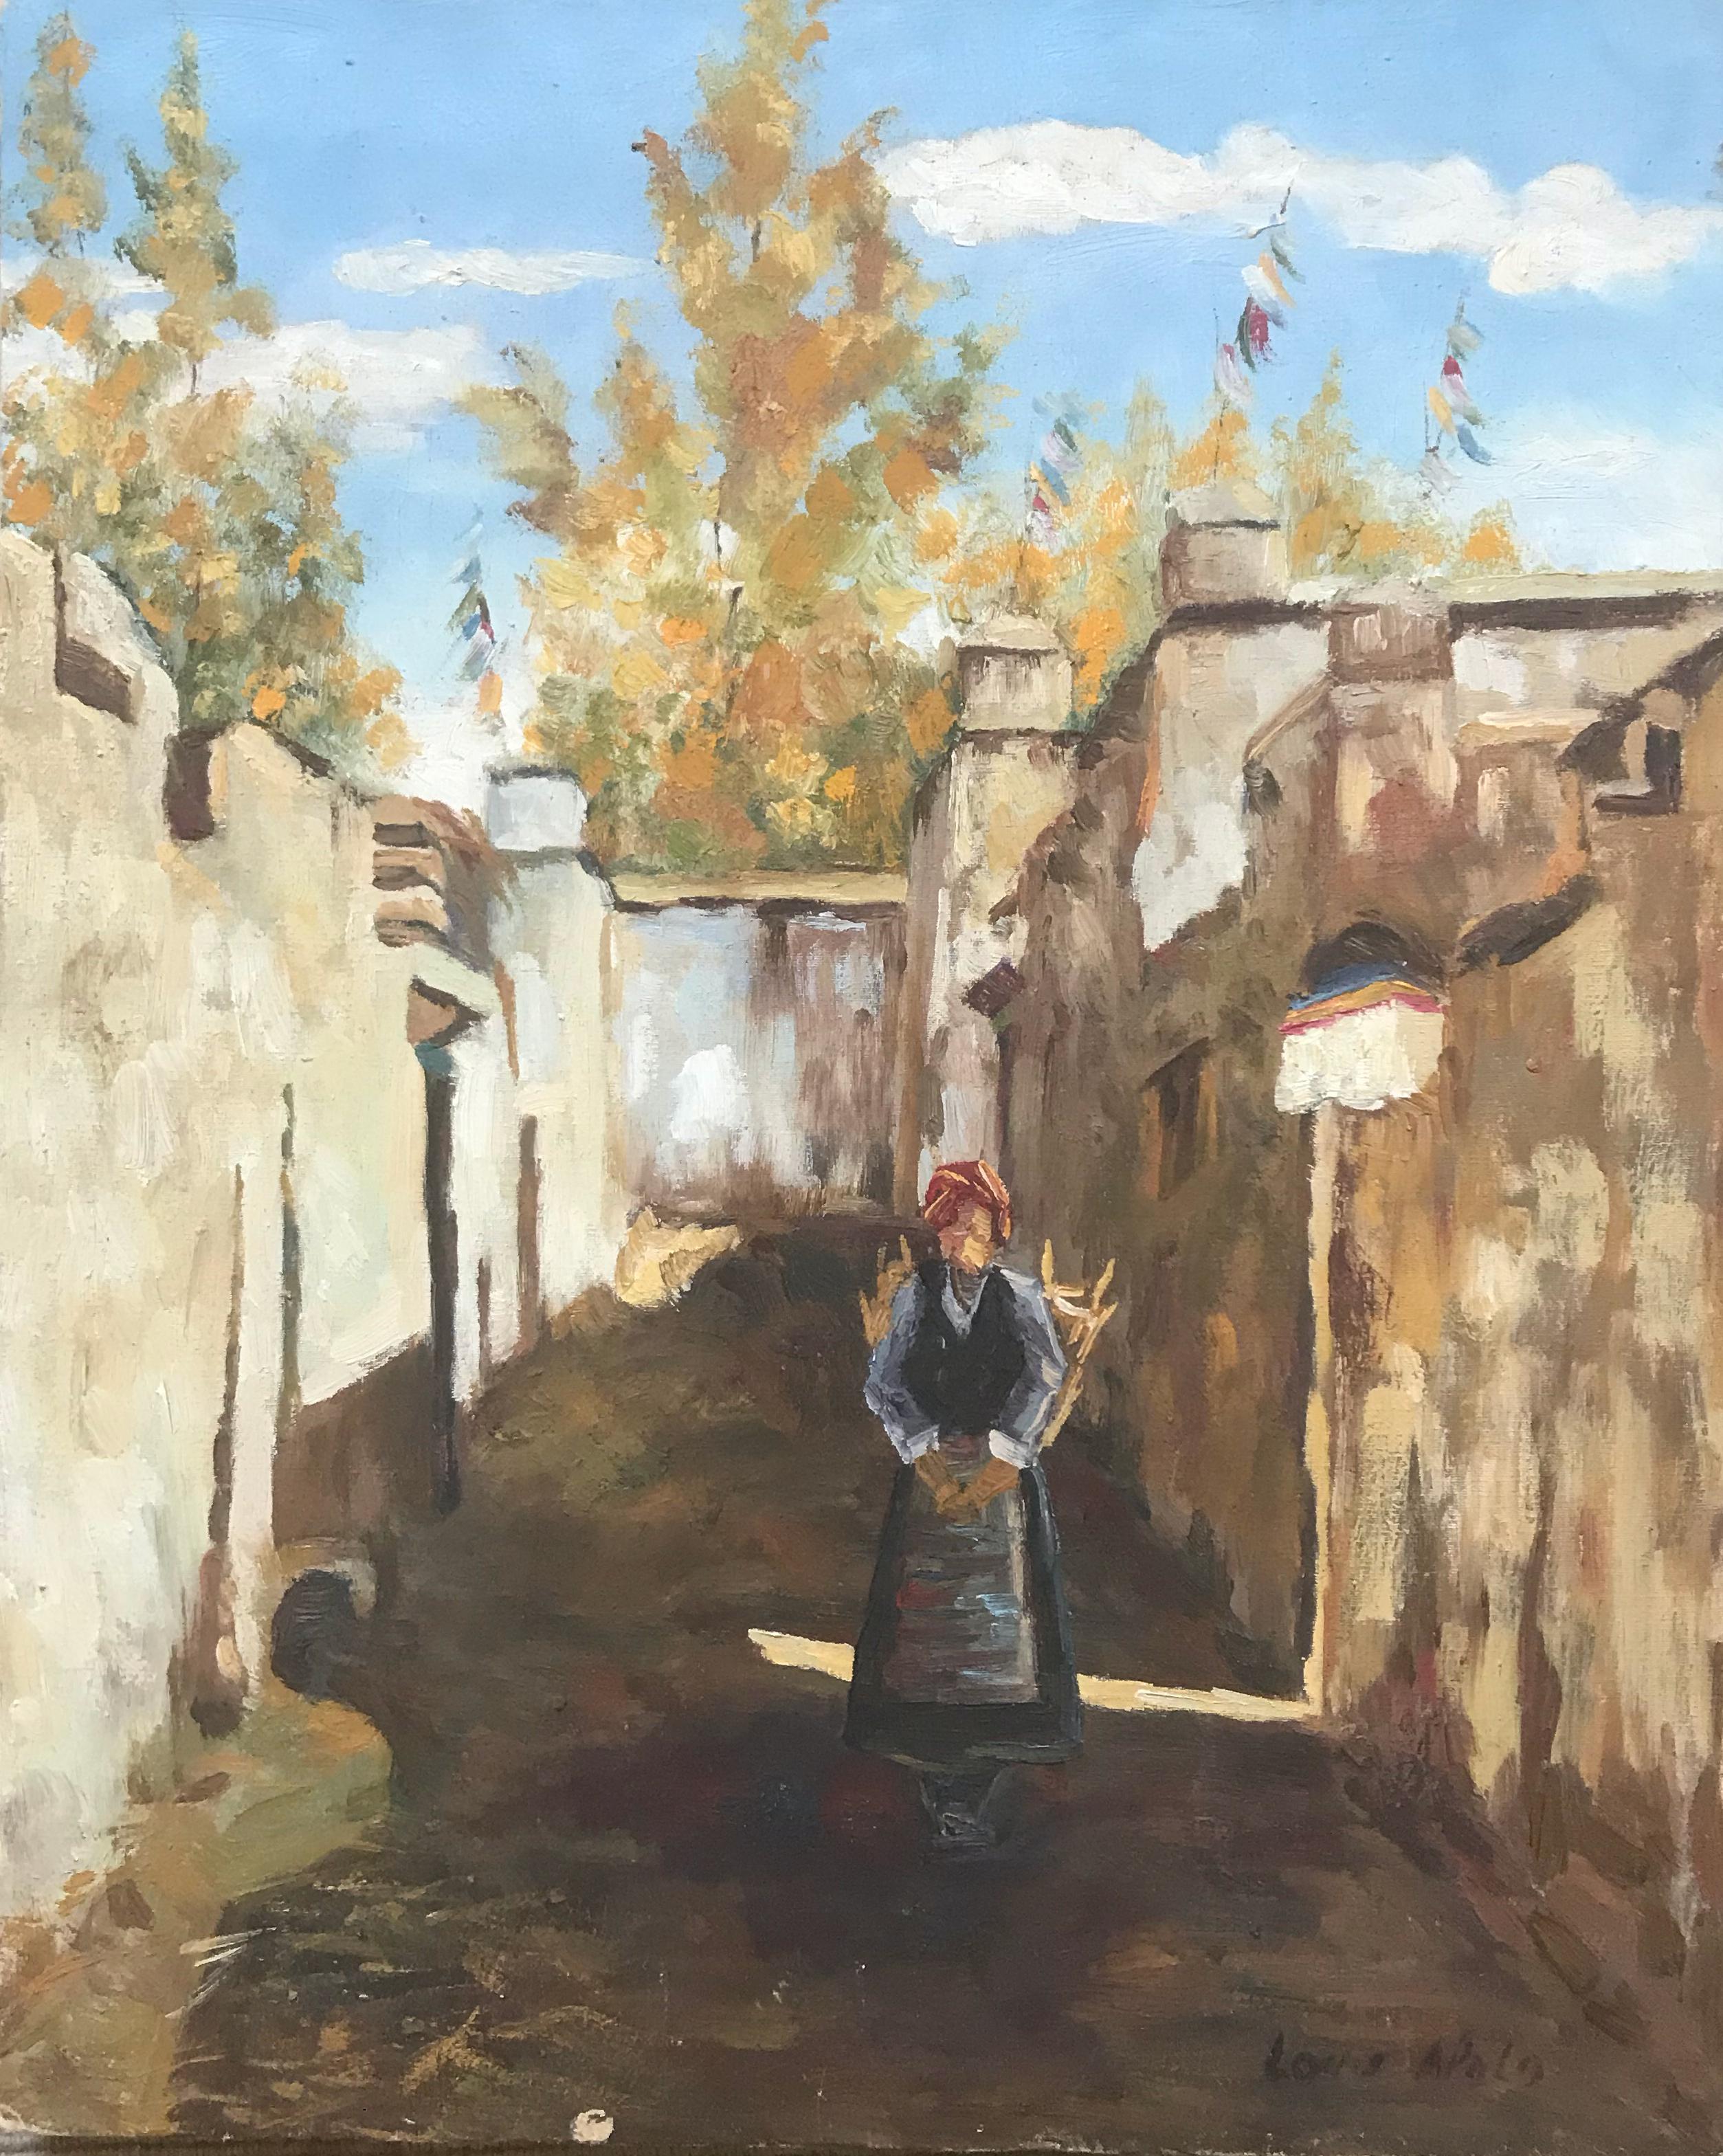 In a quaint village of humble stucco homes, a woman carries a basket of goods on her back to the town market. An isolated sliver of bright sunlight slices through an opening in a wall behind her. Unframed, ready for framing to your taste.
Proudly